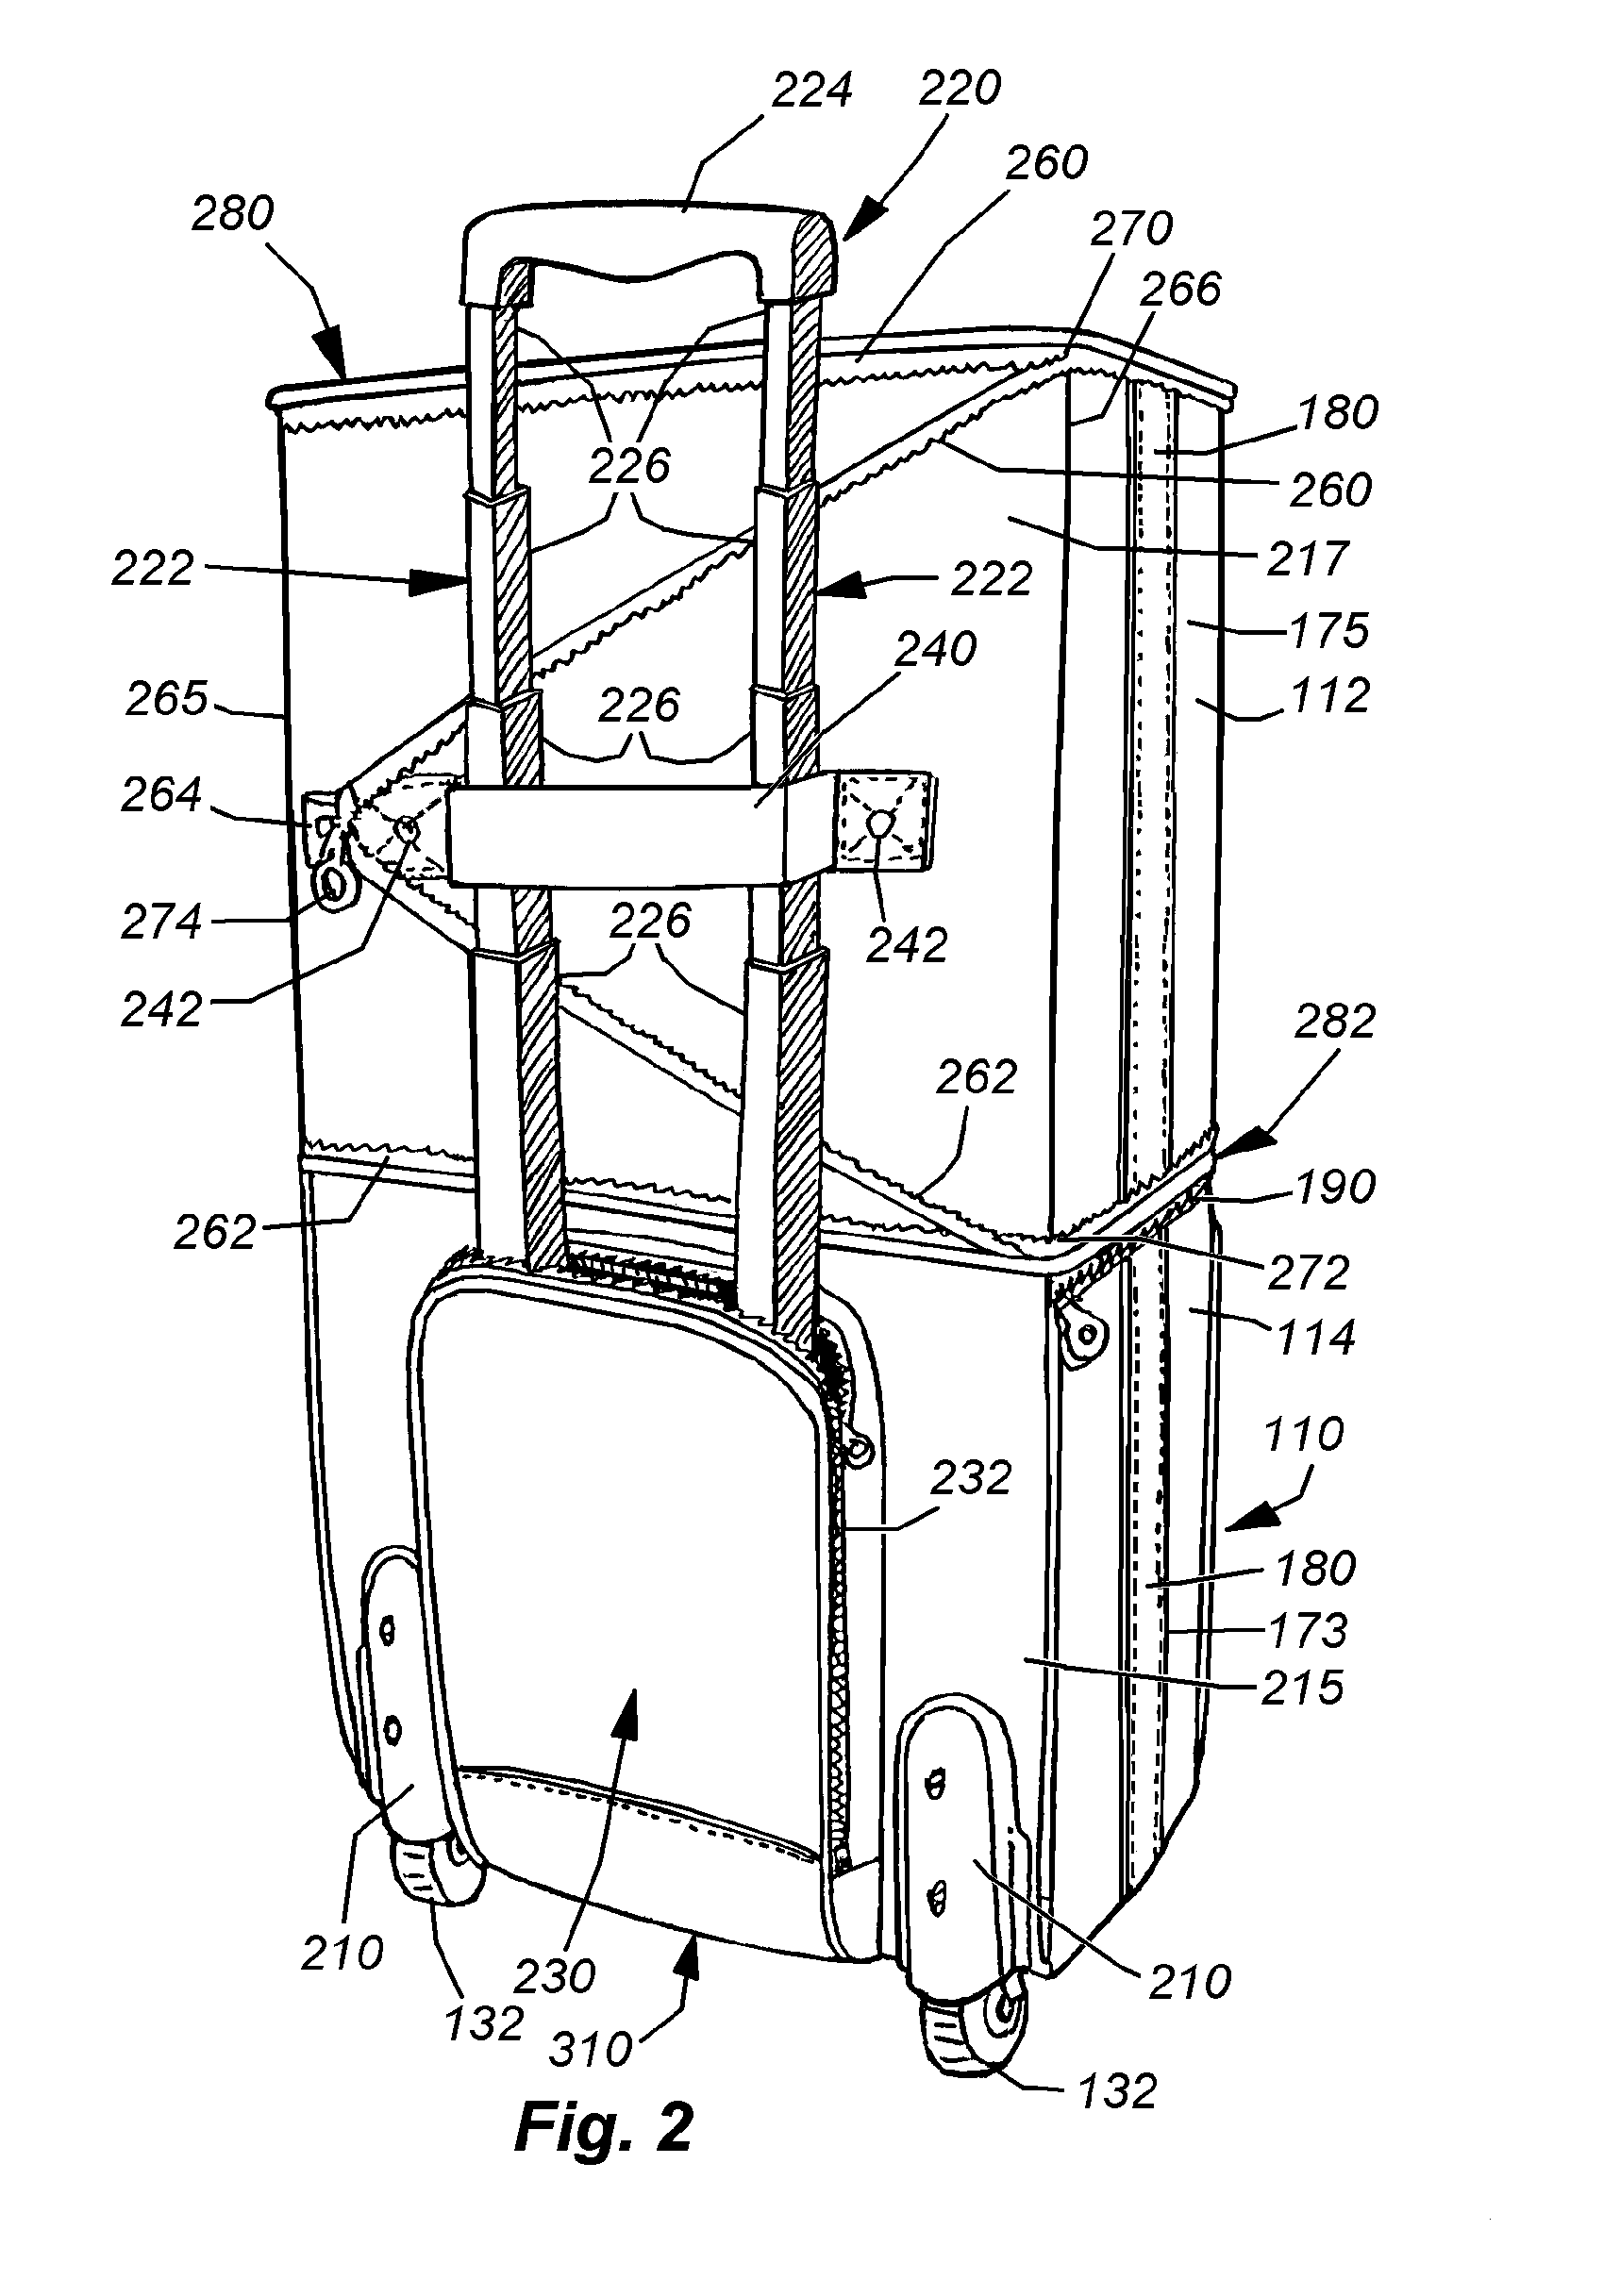 Collapsible luggage system